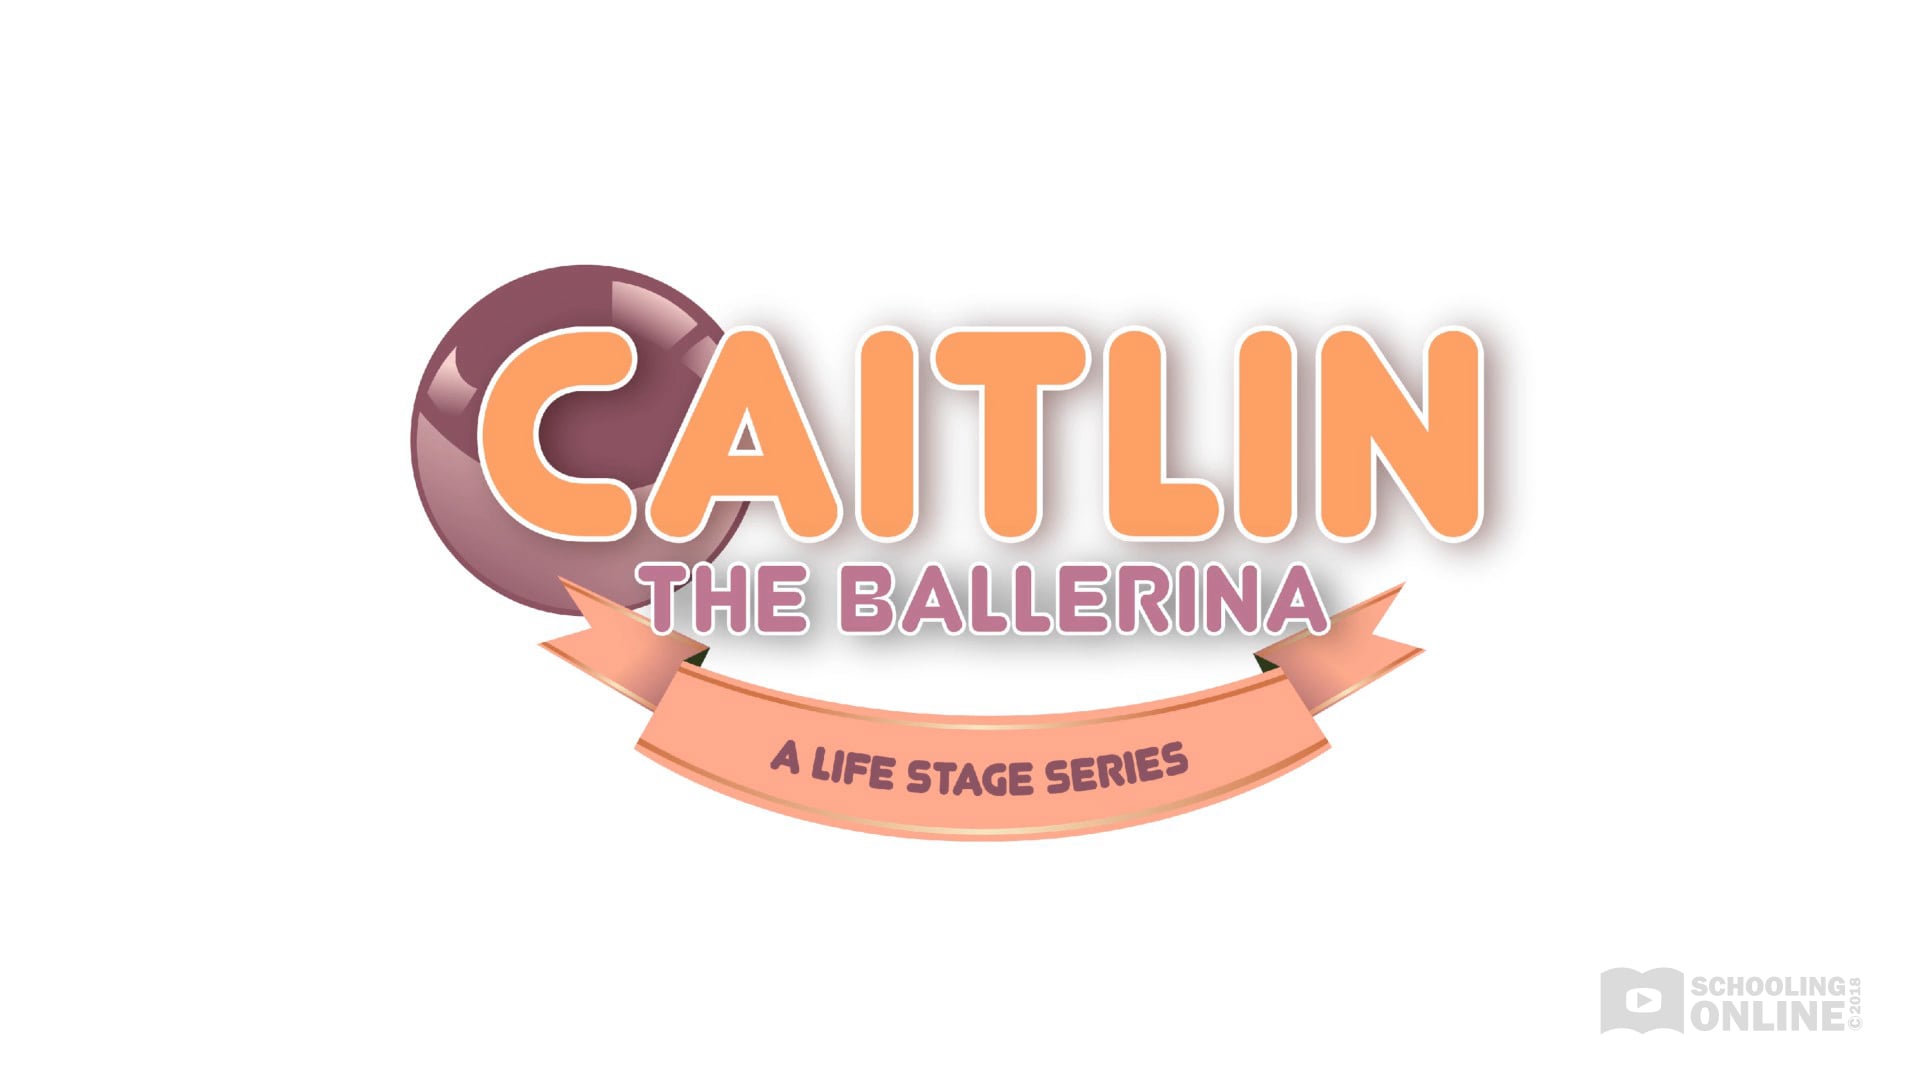 Caitlin The Ballerina - The Life Stage Series